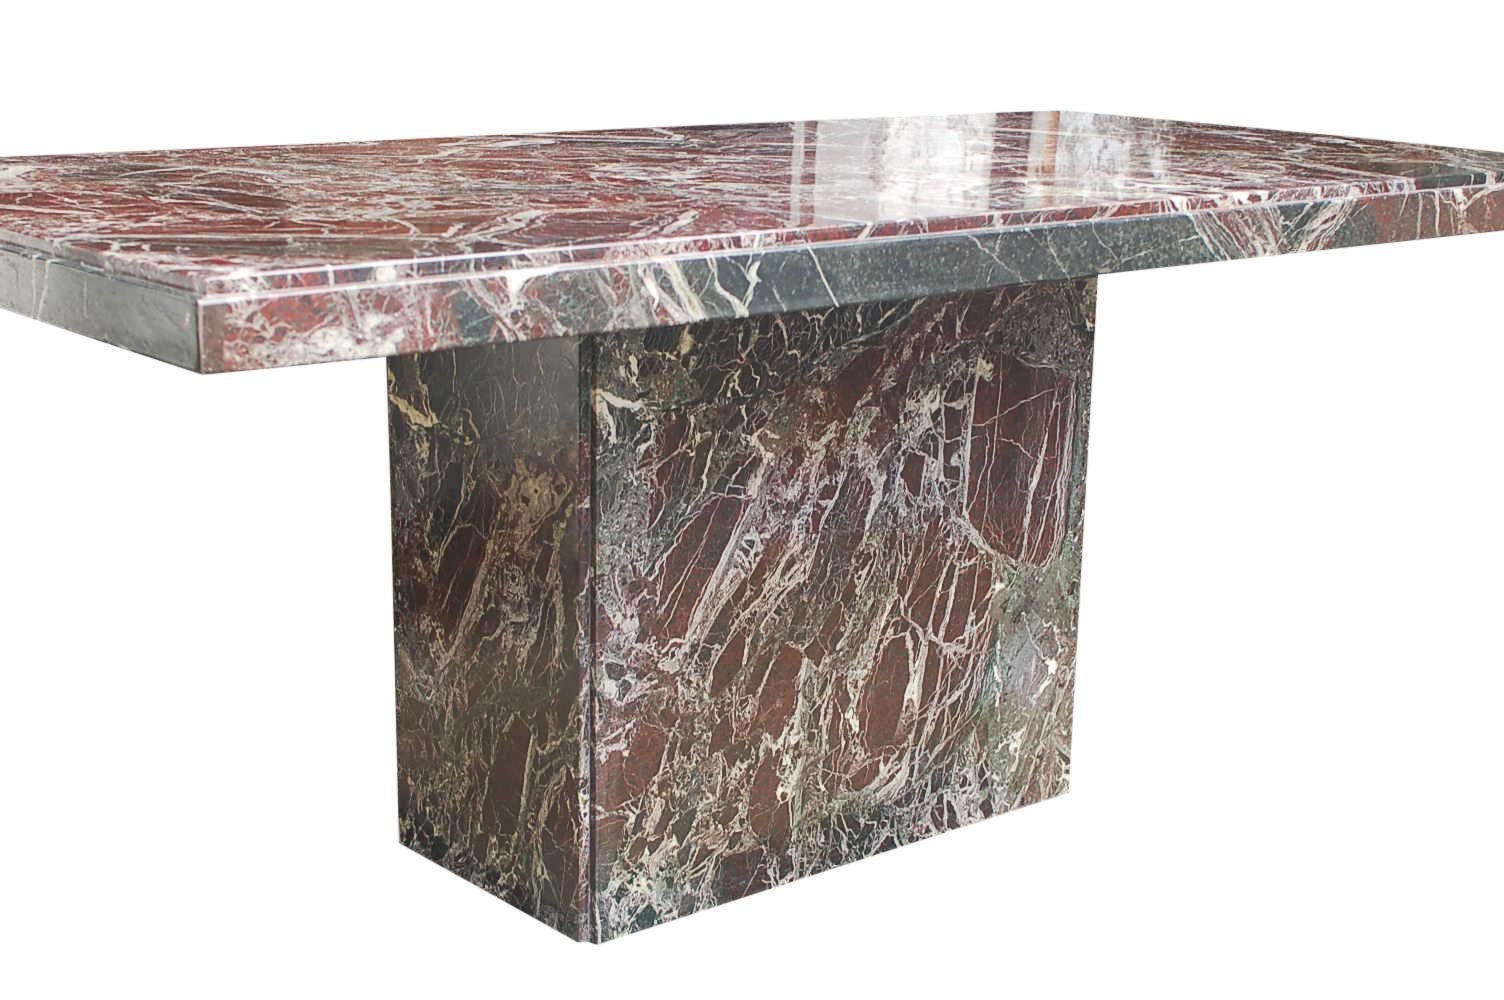 Midcentury Italian Modern Solid Marble Slab Dining Table in Black and Burgundy 1